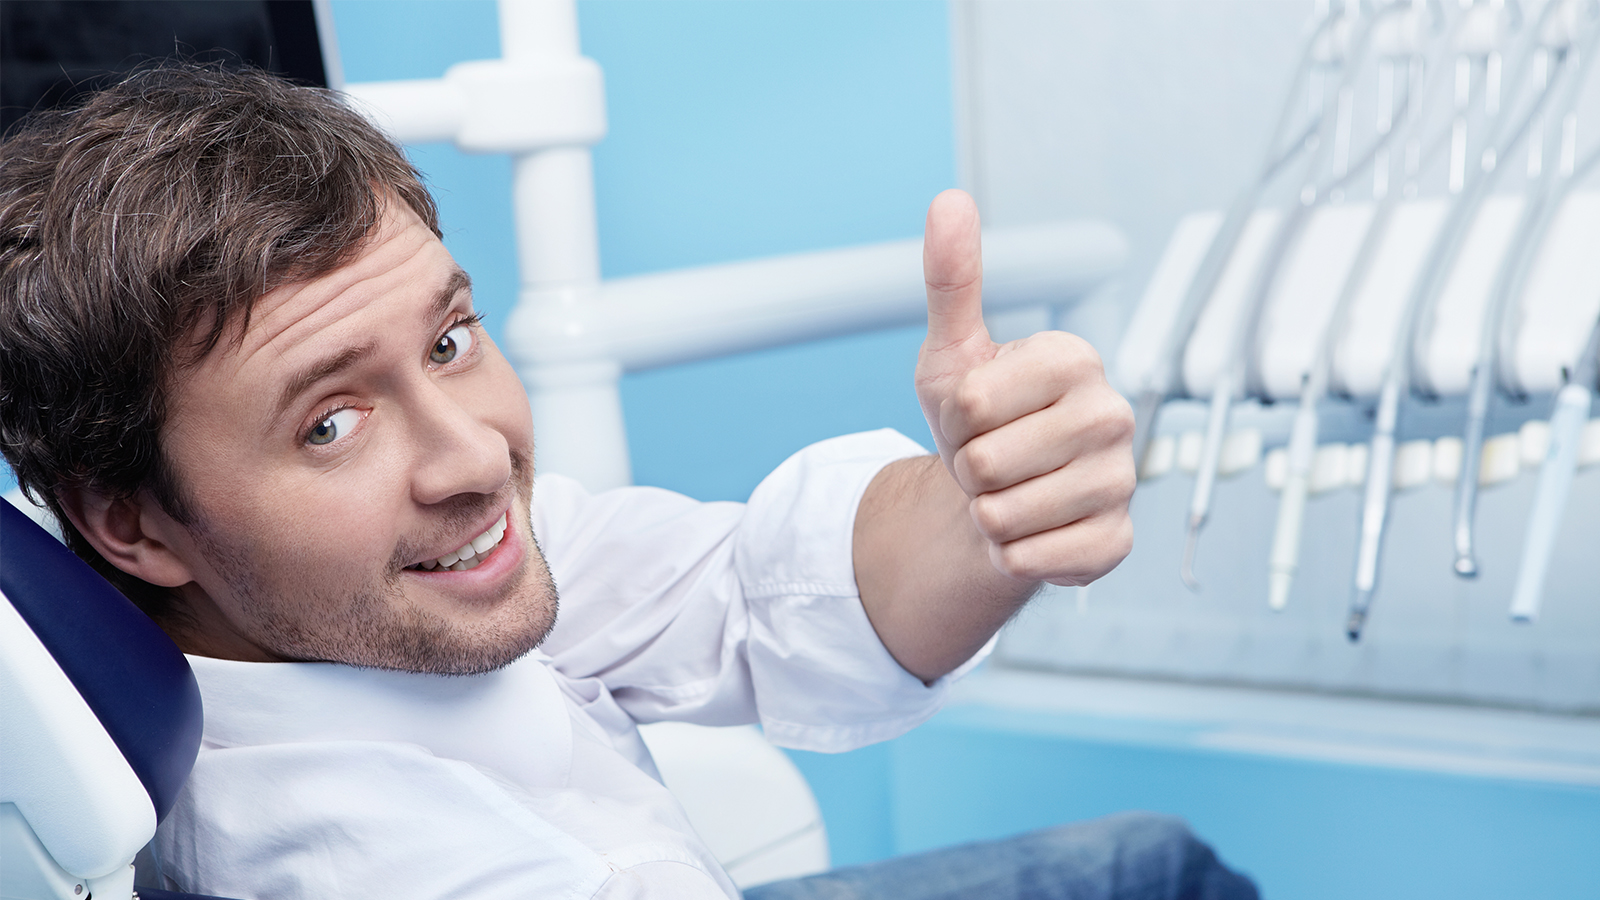 Top 3 Cheapest Places for Good Dental Work